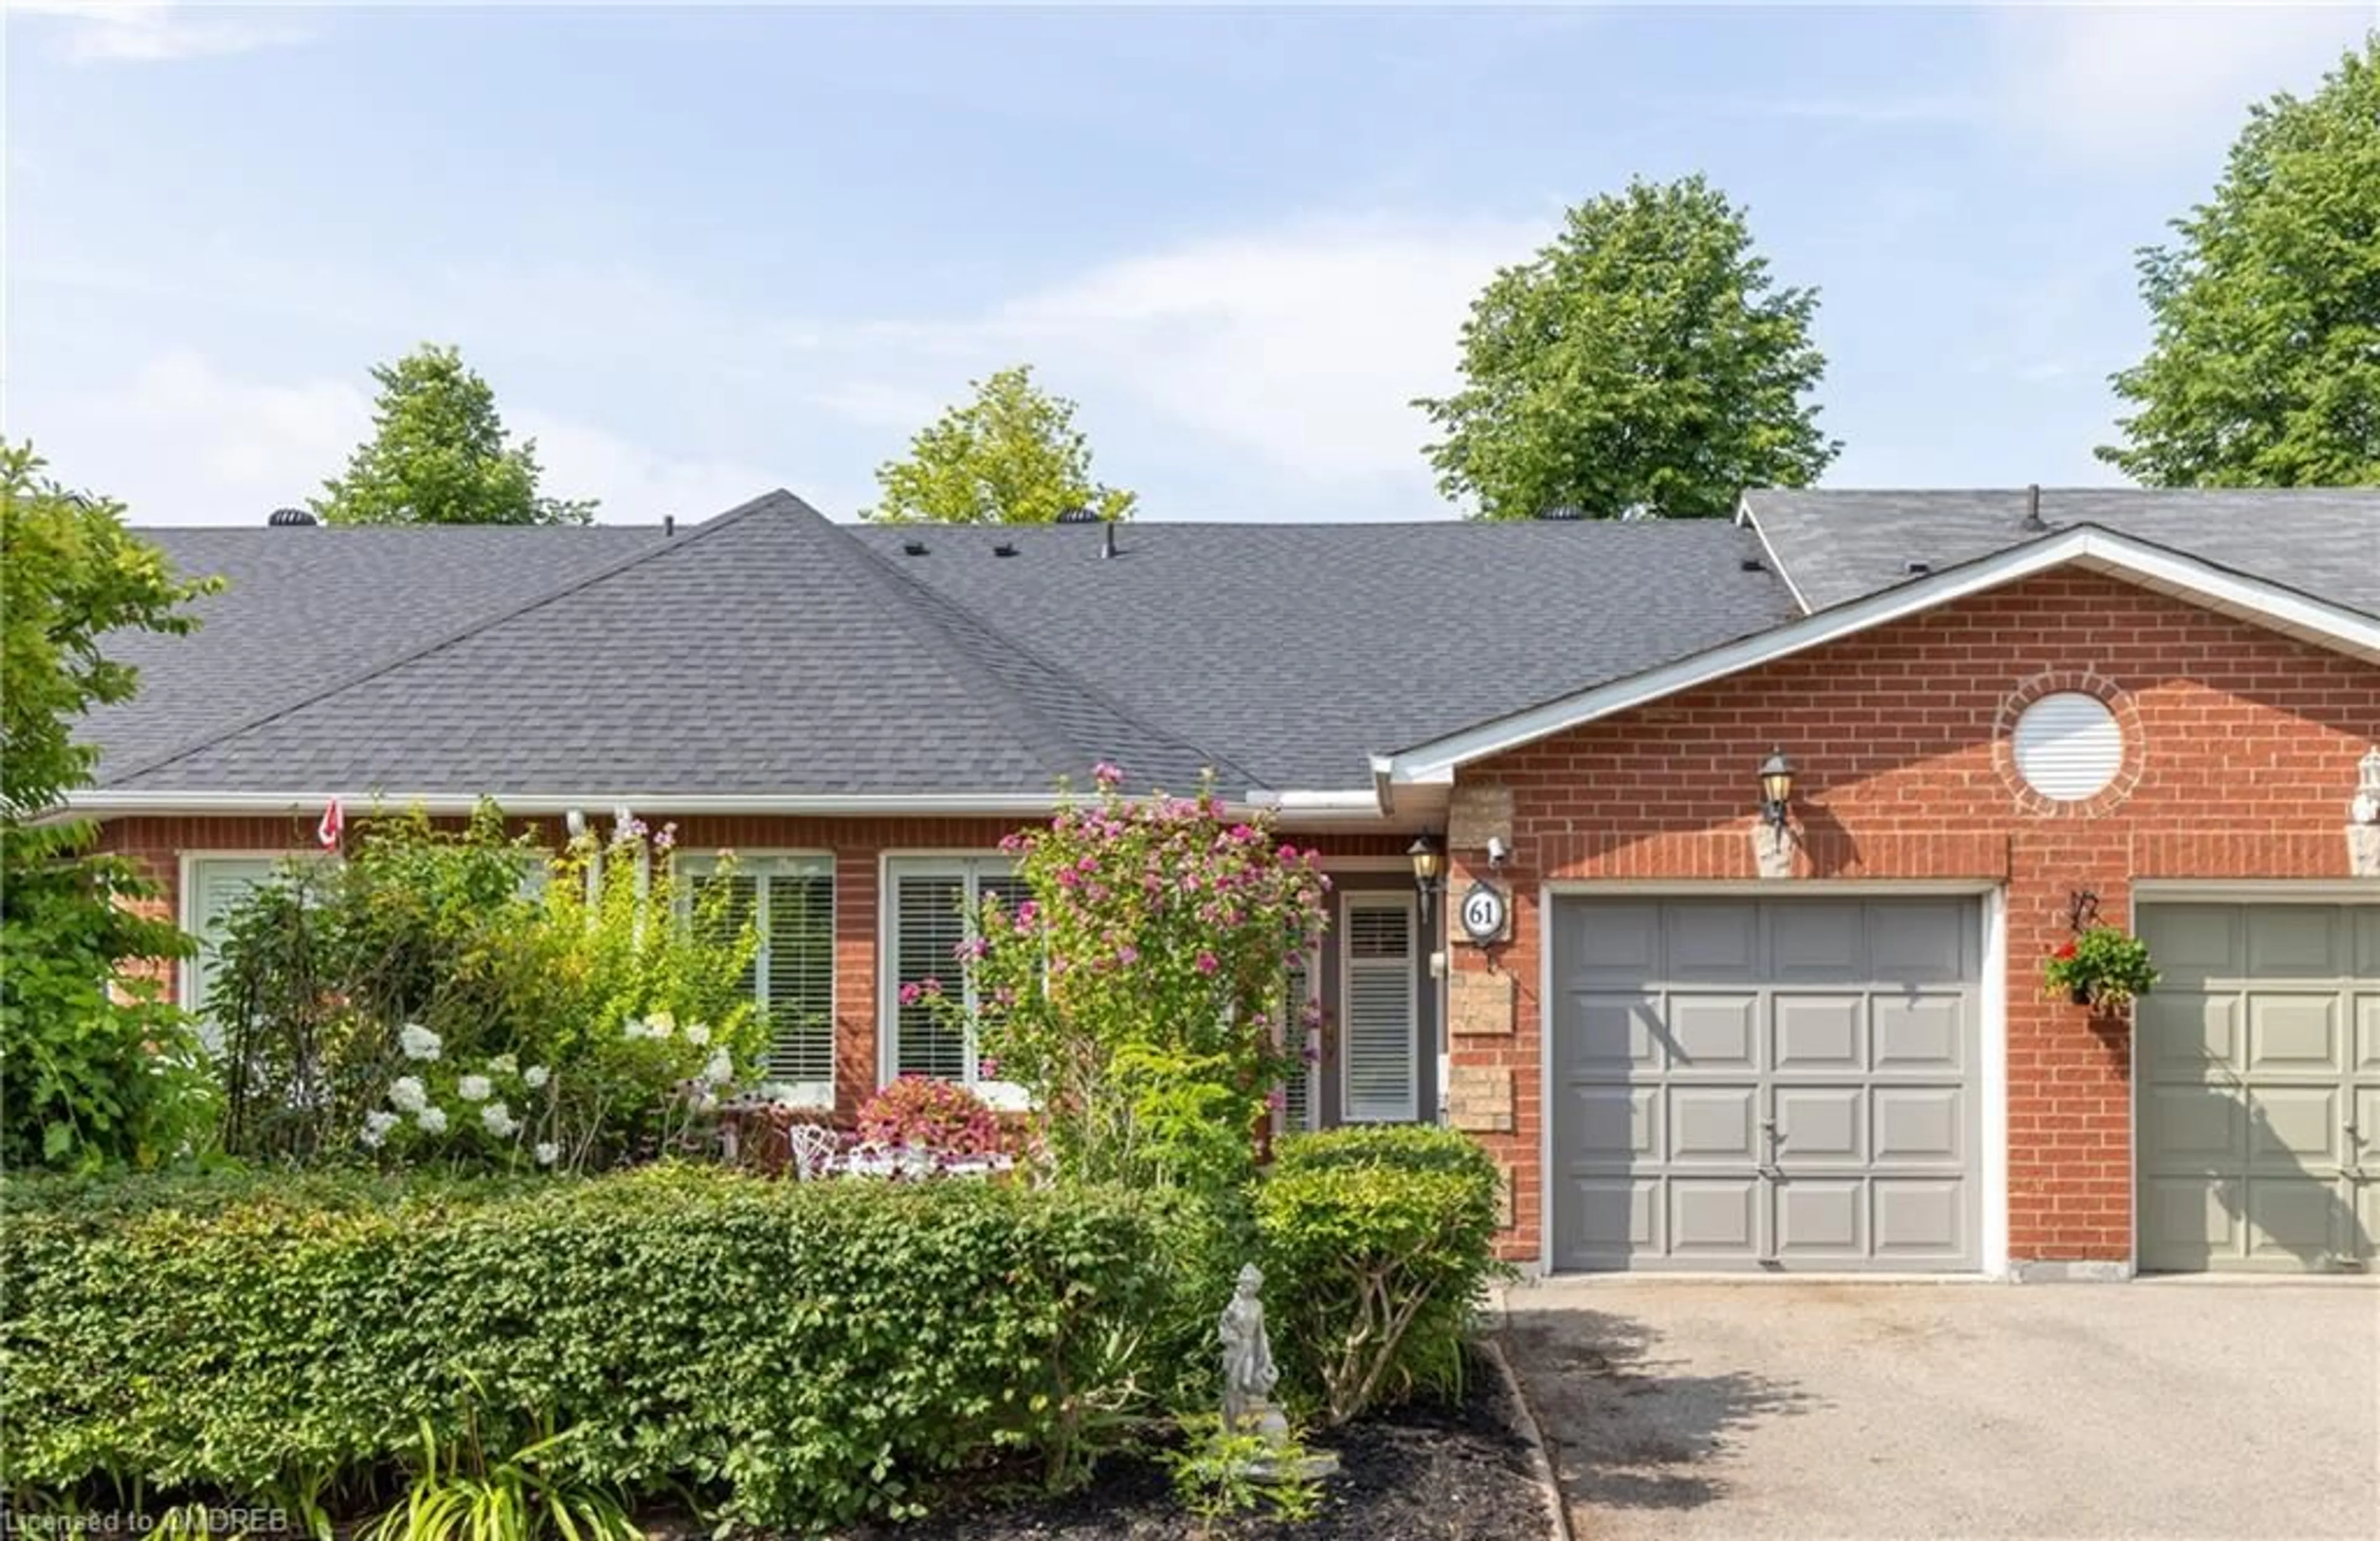 Home with brick exterior material for 1240 Westview Terr #61, Oakville Ontario L6M 3M4